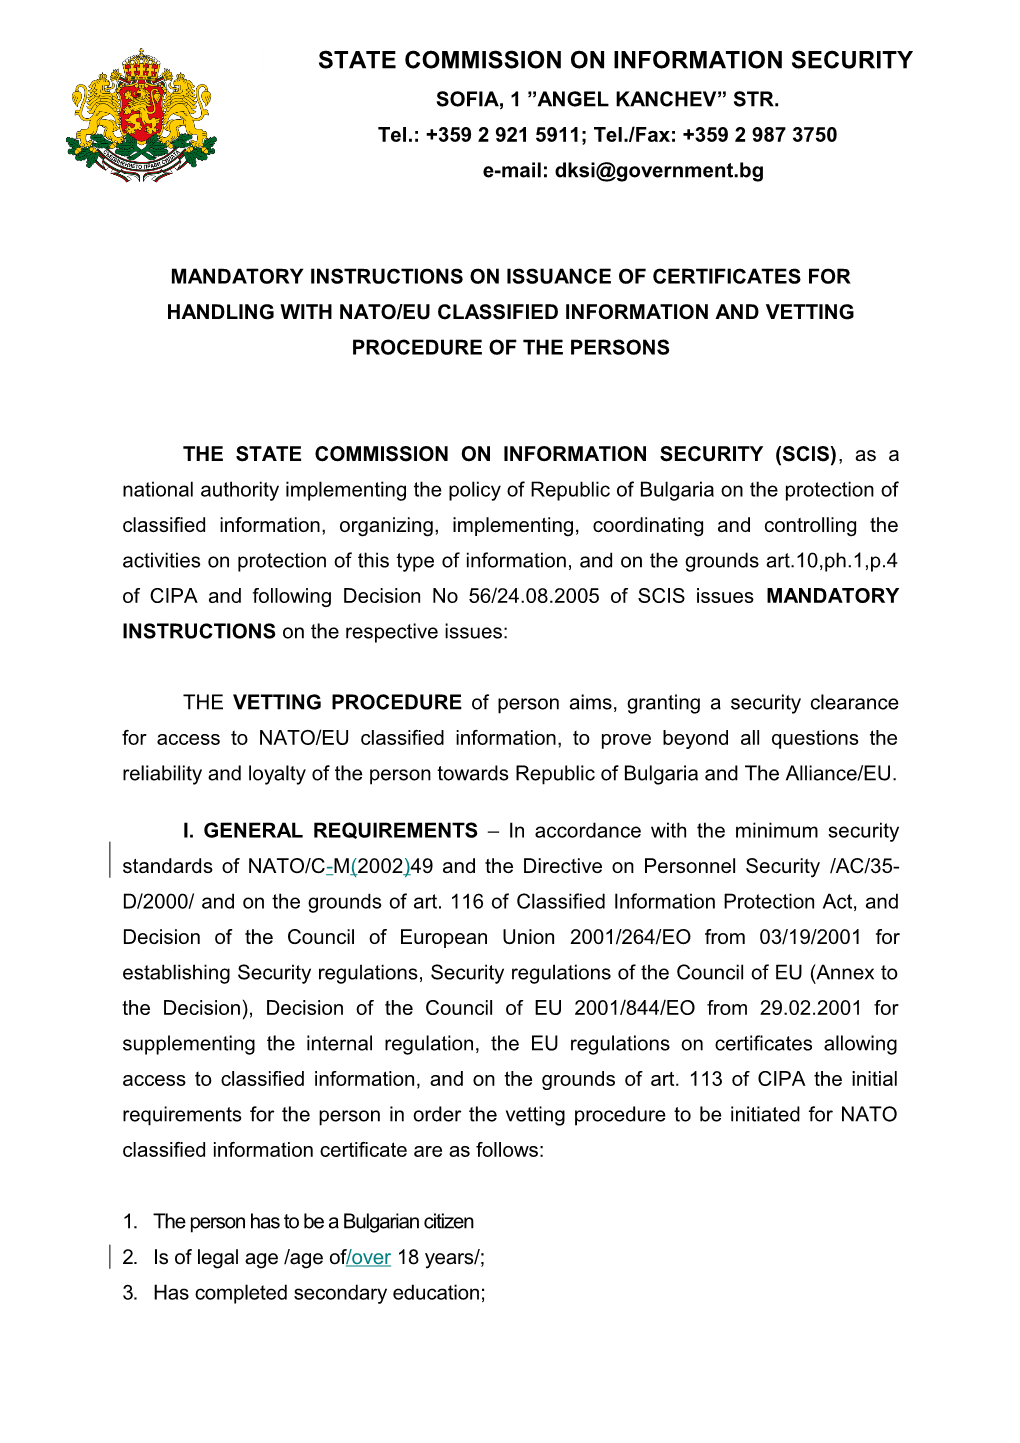 Mandatory Instructions on Issuance of Certificates for Operation with Nato/Eu Classified